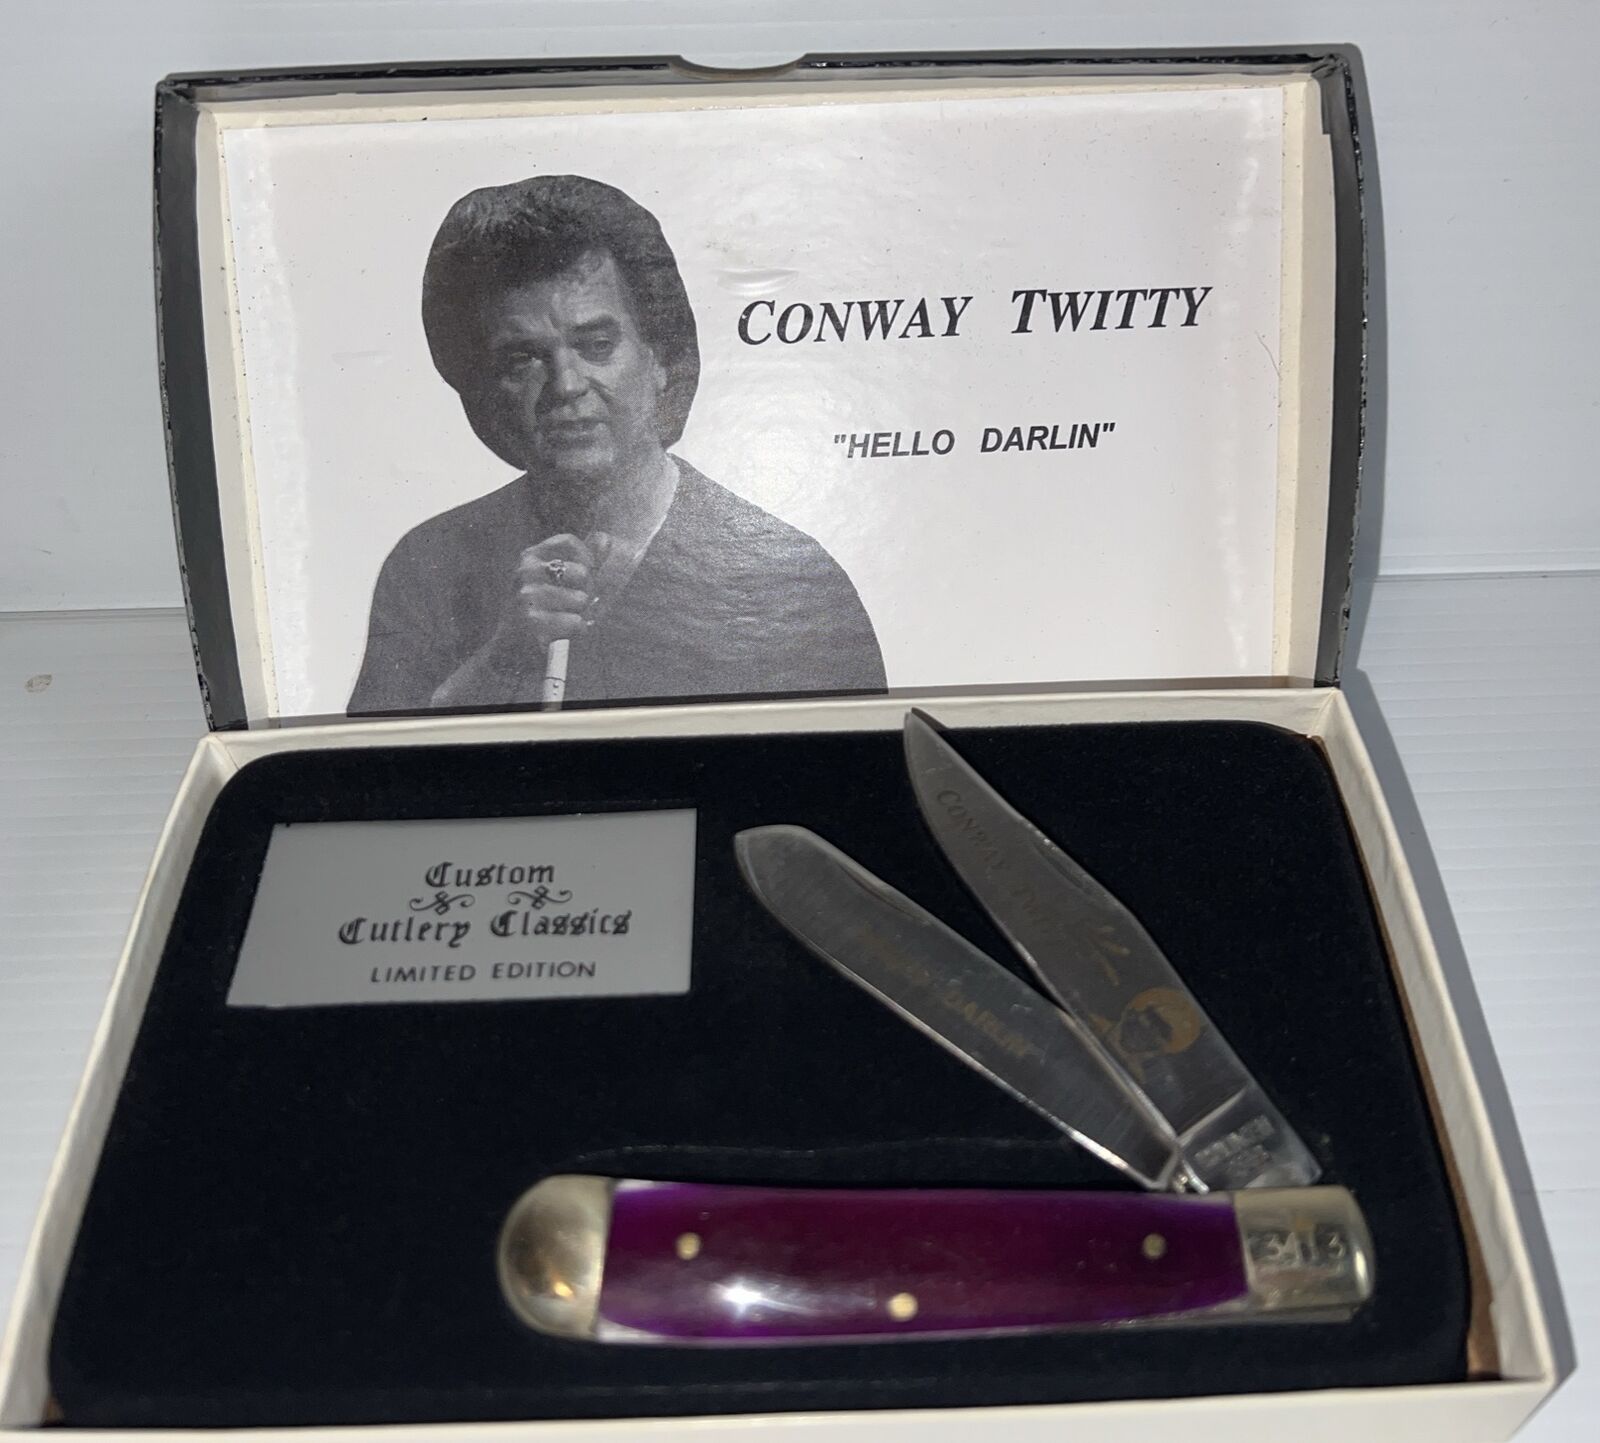 Vintage CONWAY TWITTY “HELLO DARLIN” Pocket Knife Limited Edition